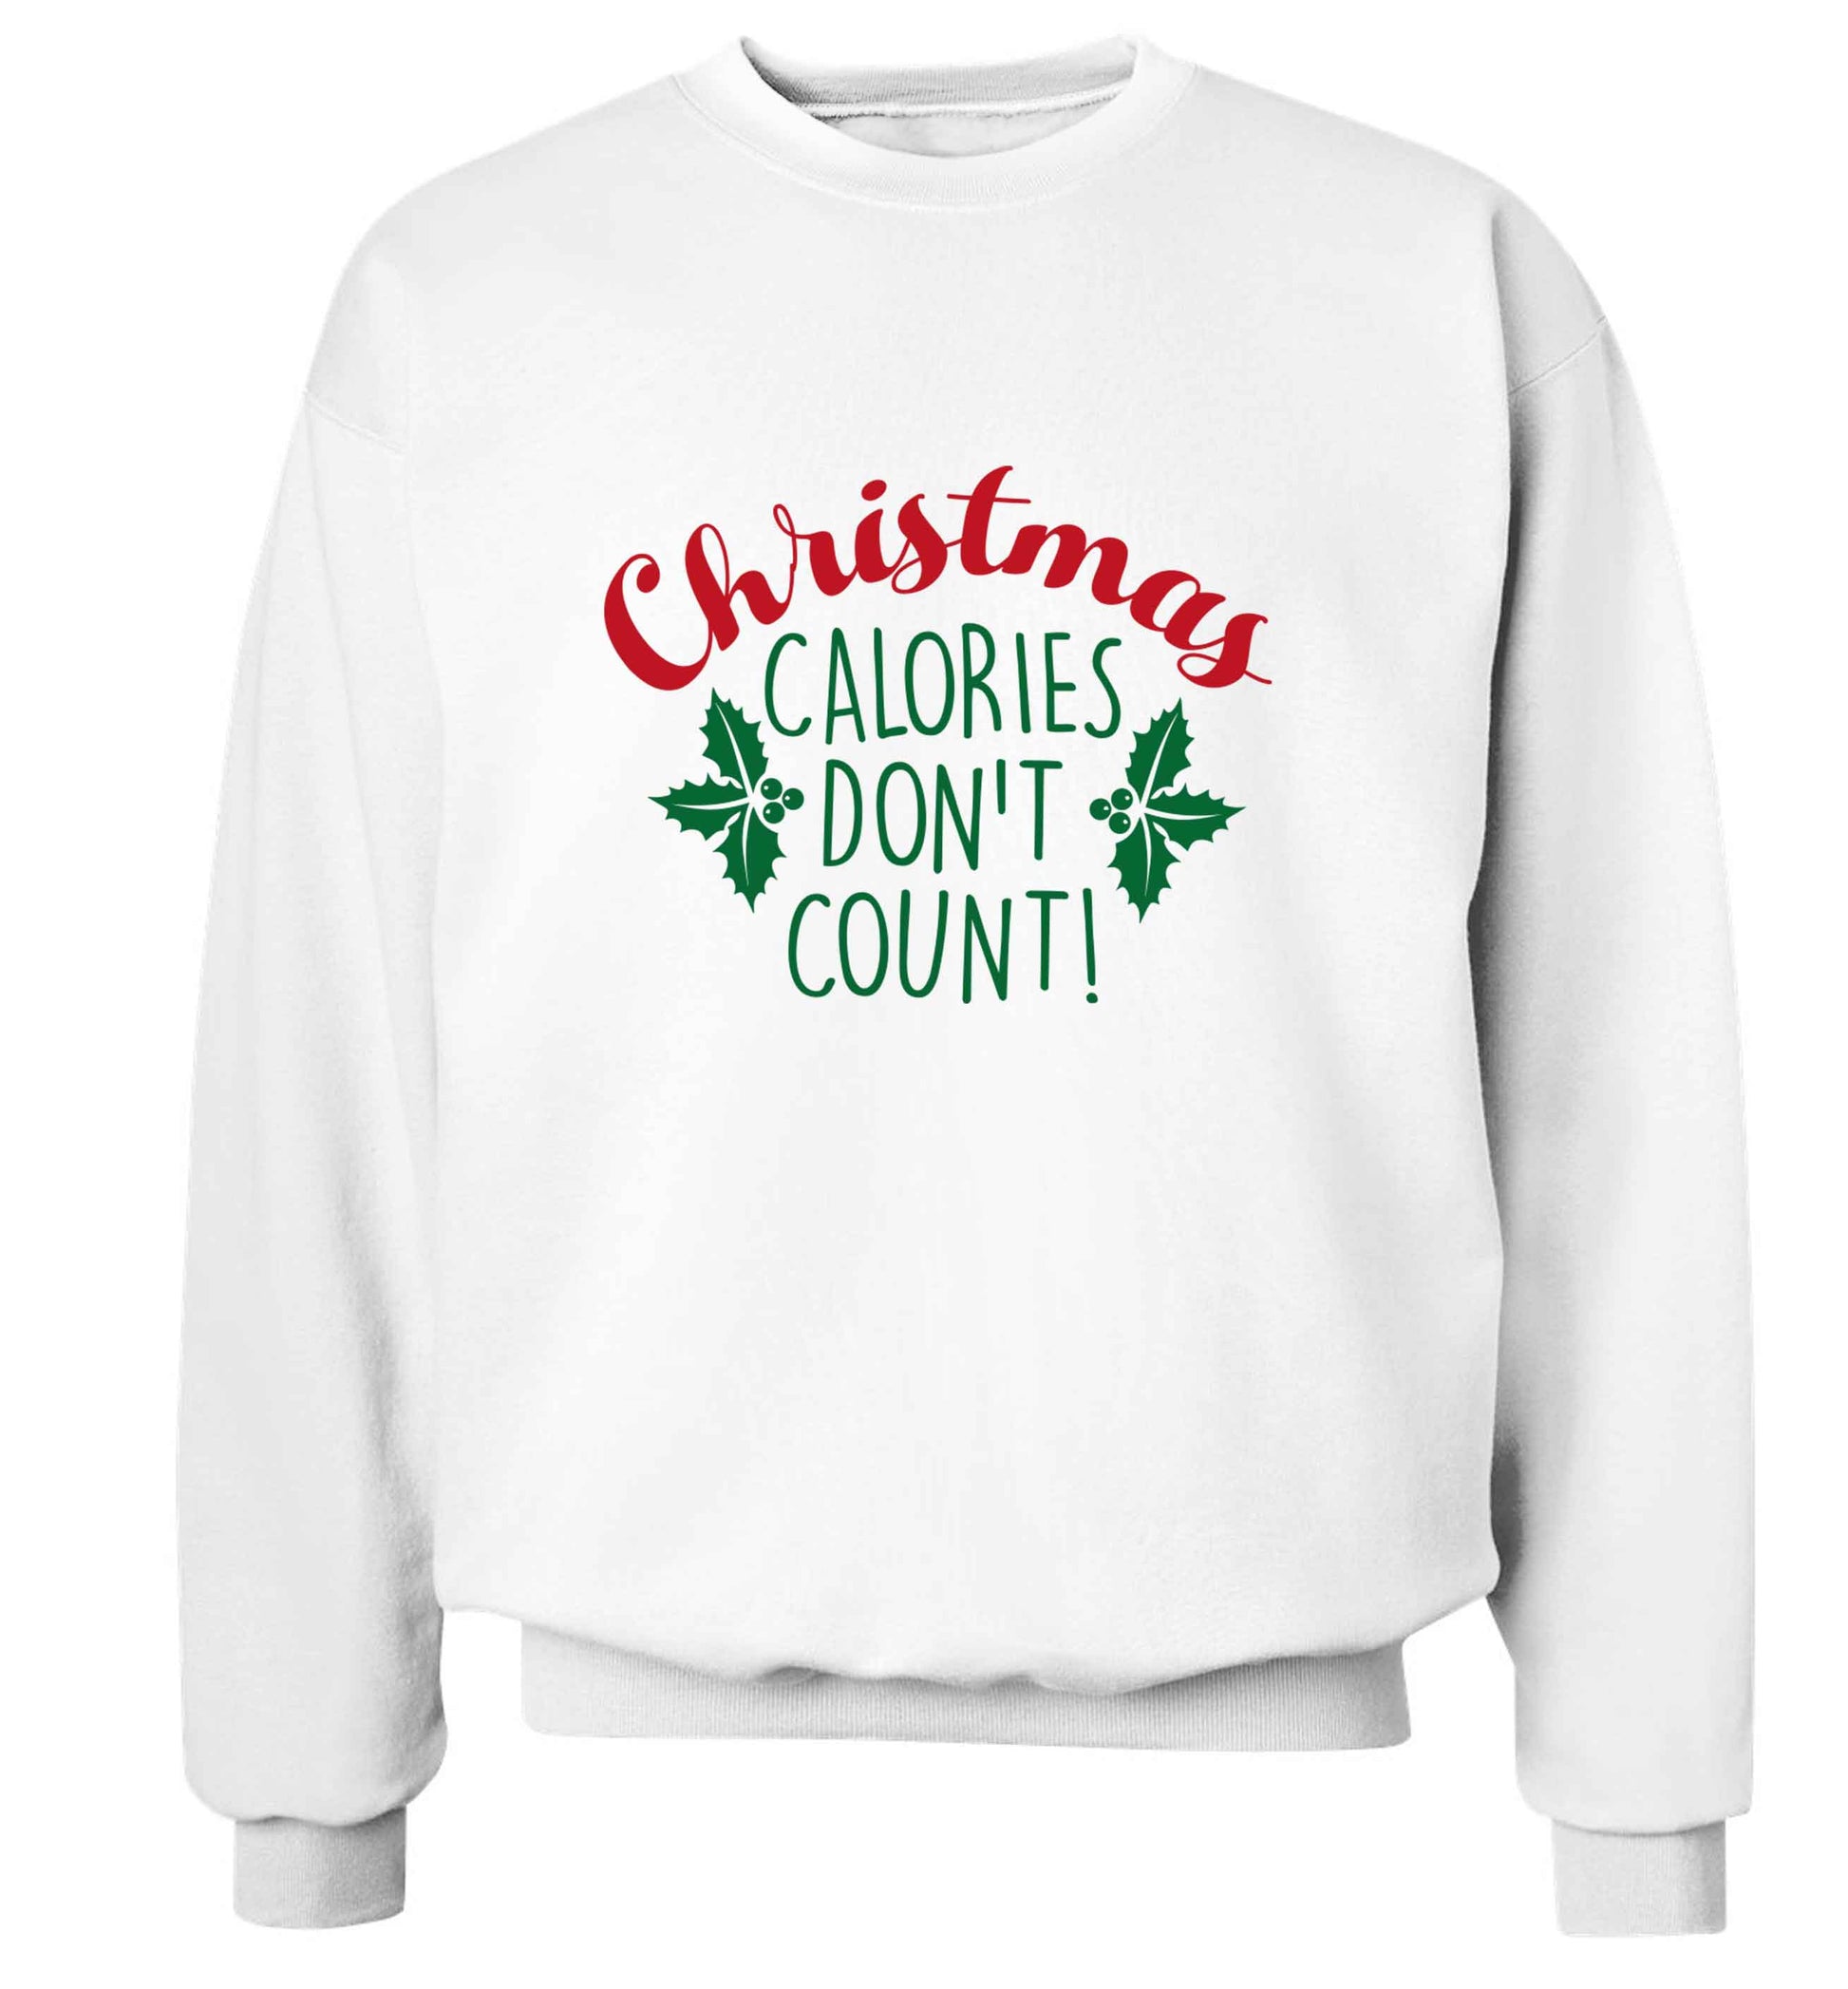 Christmas calories don't count adult's unisex white sweater 2XL